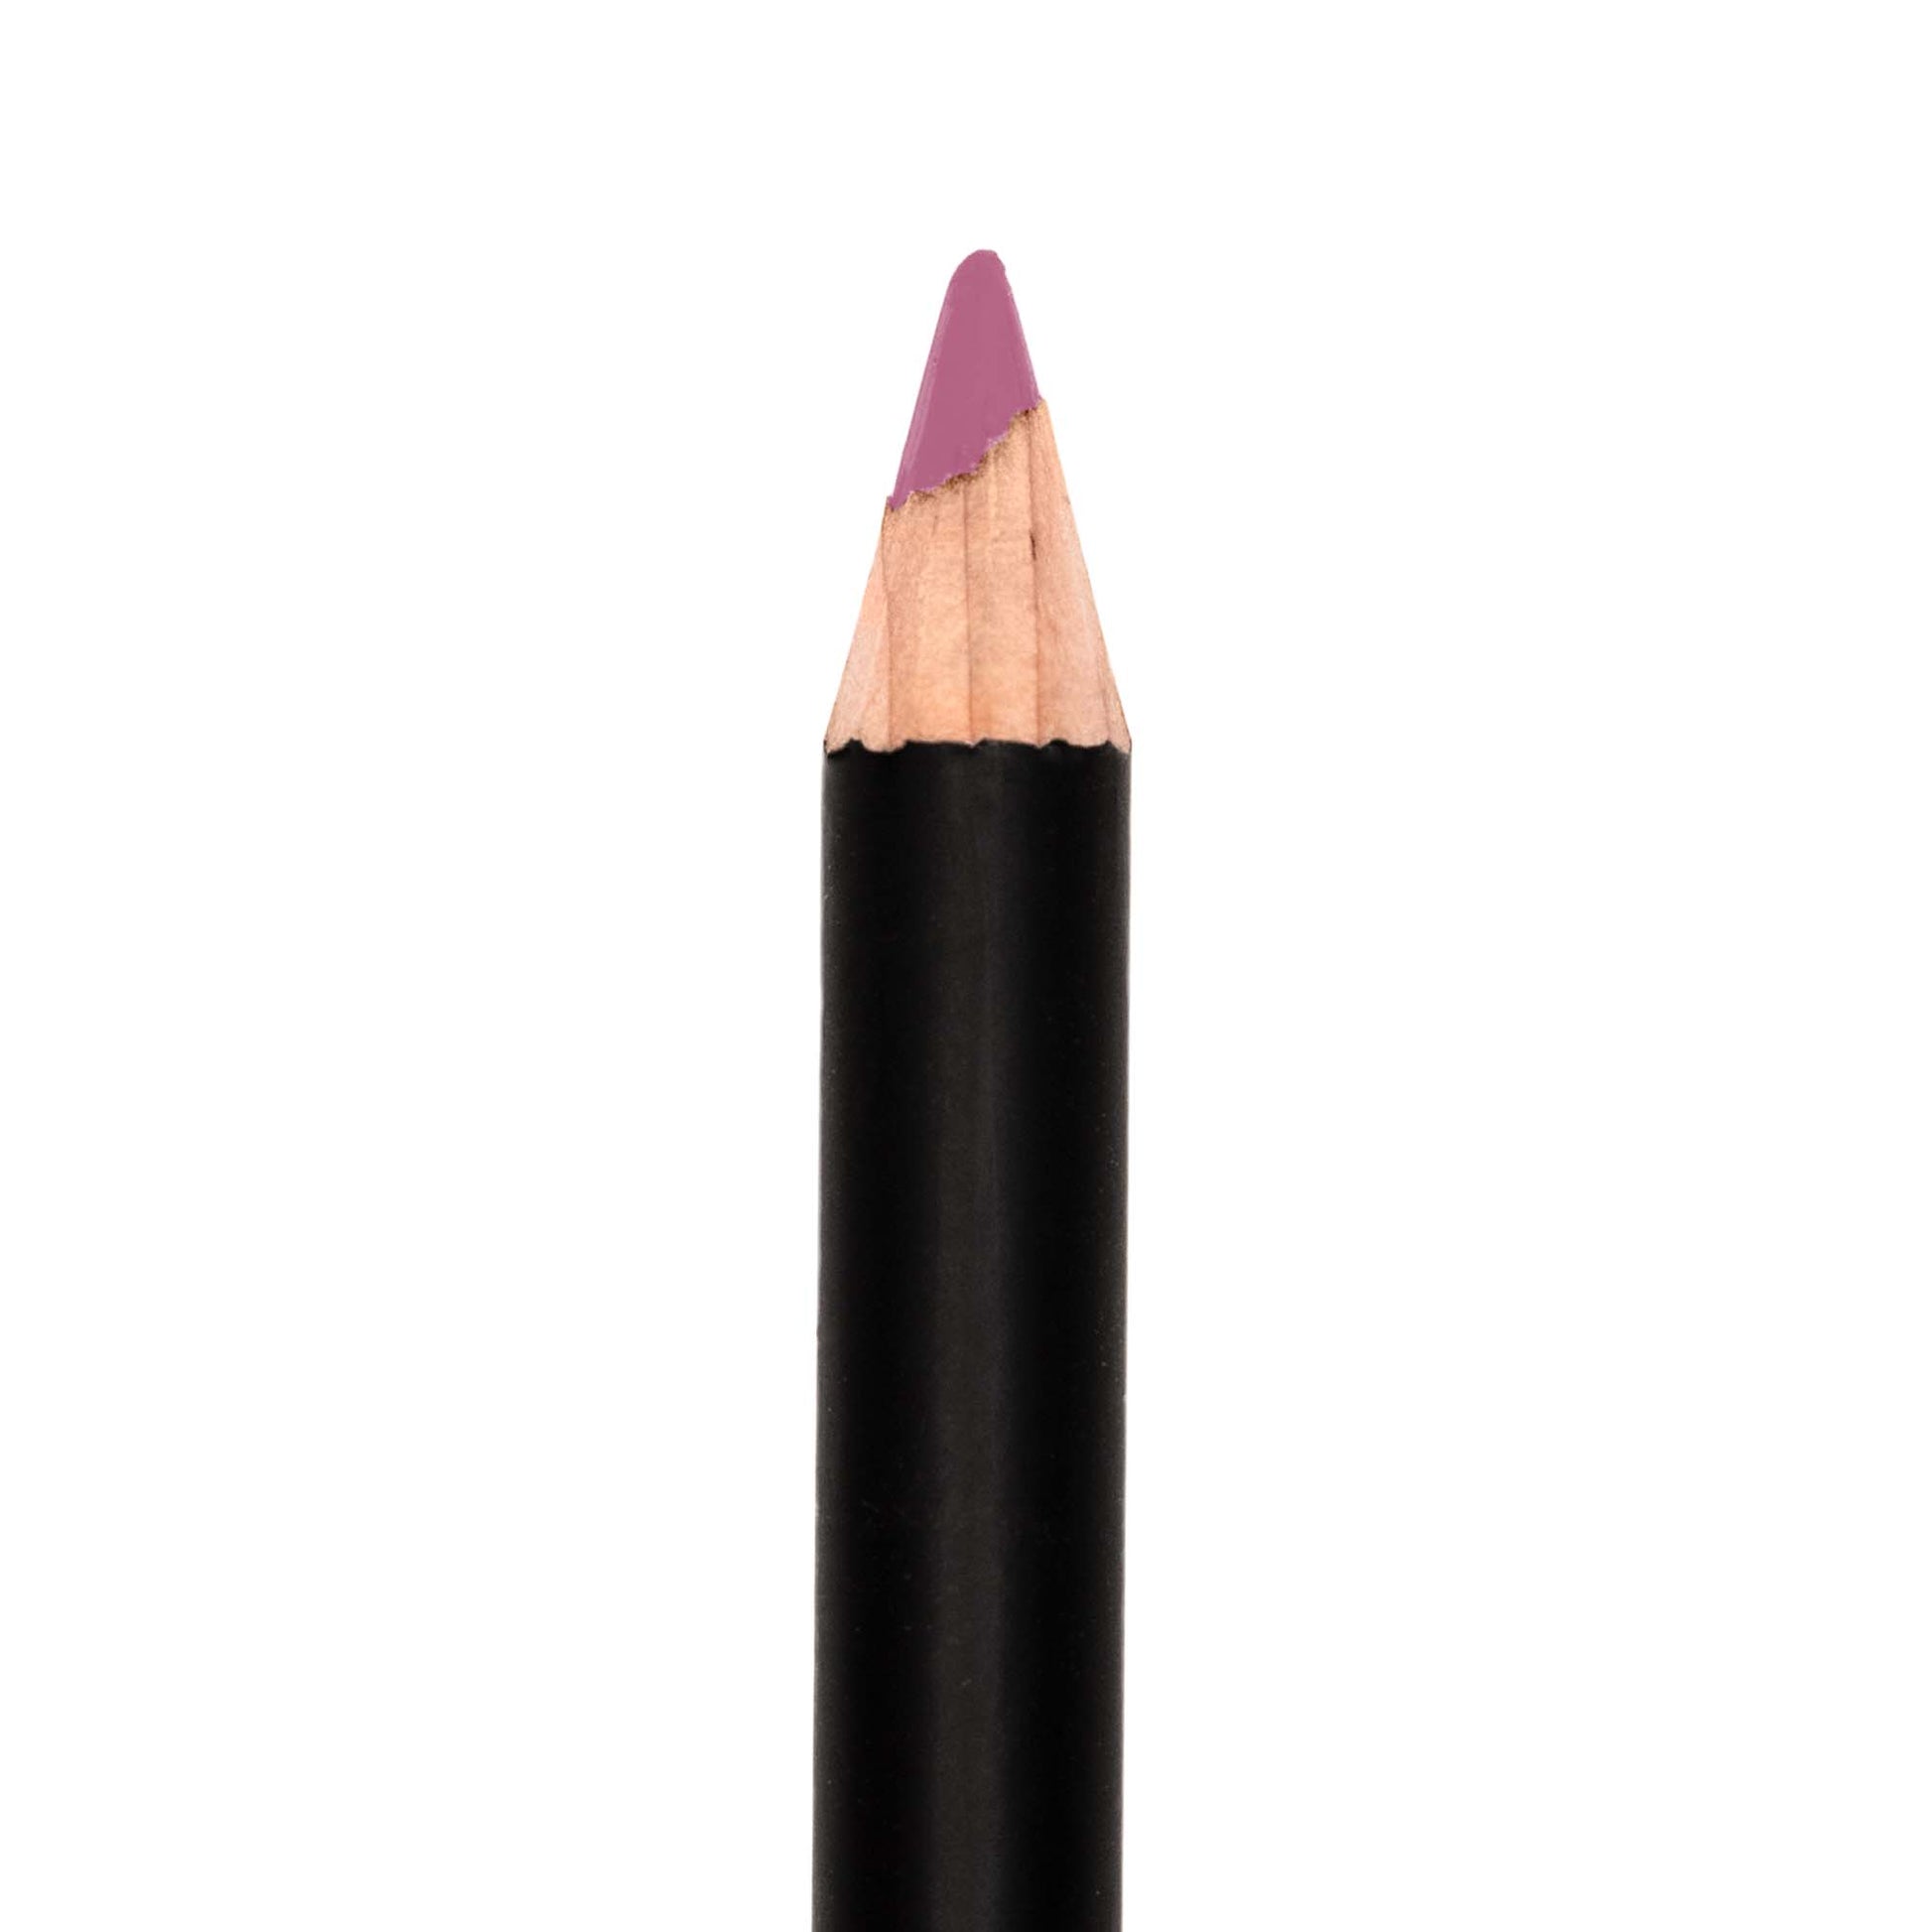 Suggestion  Get the perfect lip look with Cruisin Organics Berry Nude Liner Pencil. This multi-purpose pencil defines and shapes your lips while providing a natural and long-lasting color. Made with organic ingredients for a nourishing and gentle feel. Create a flawless pout with ease.